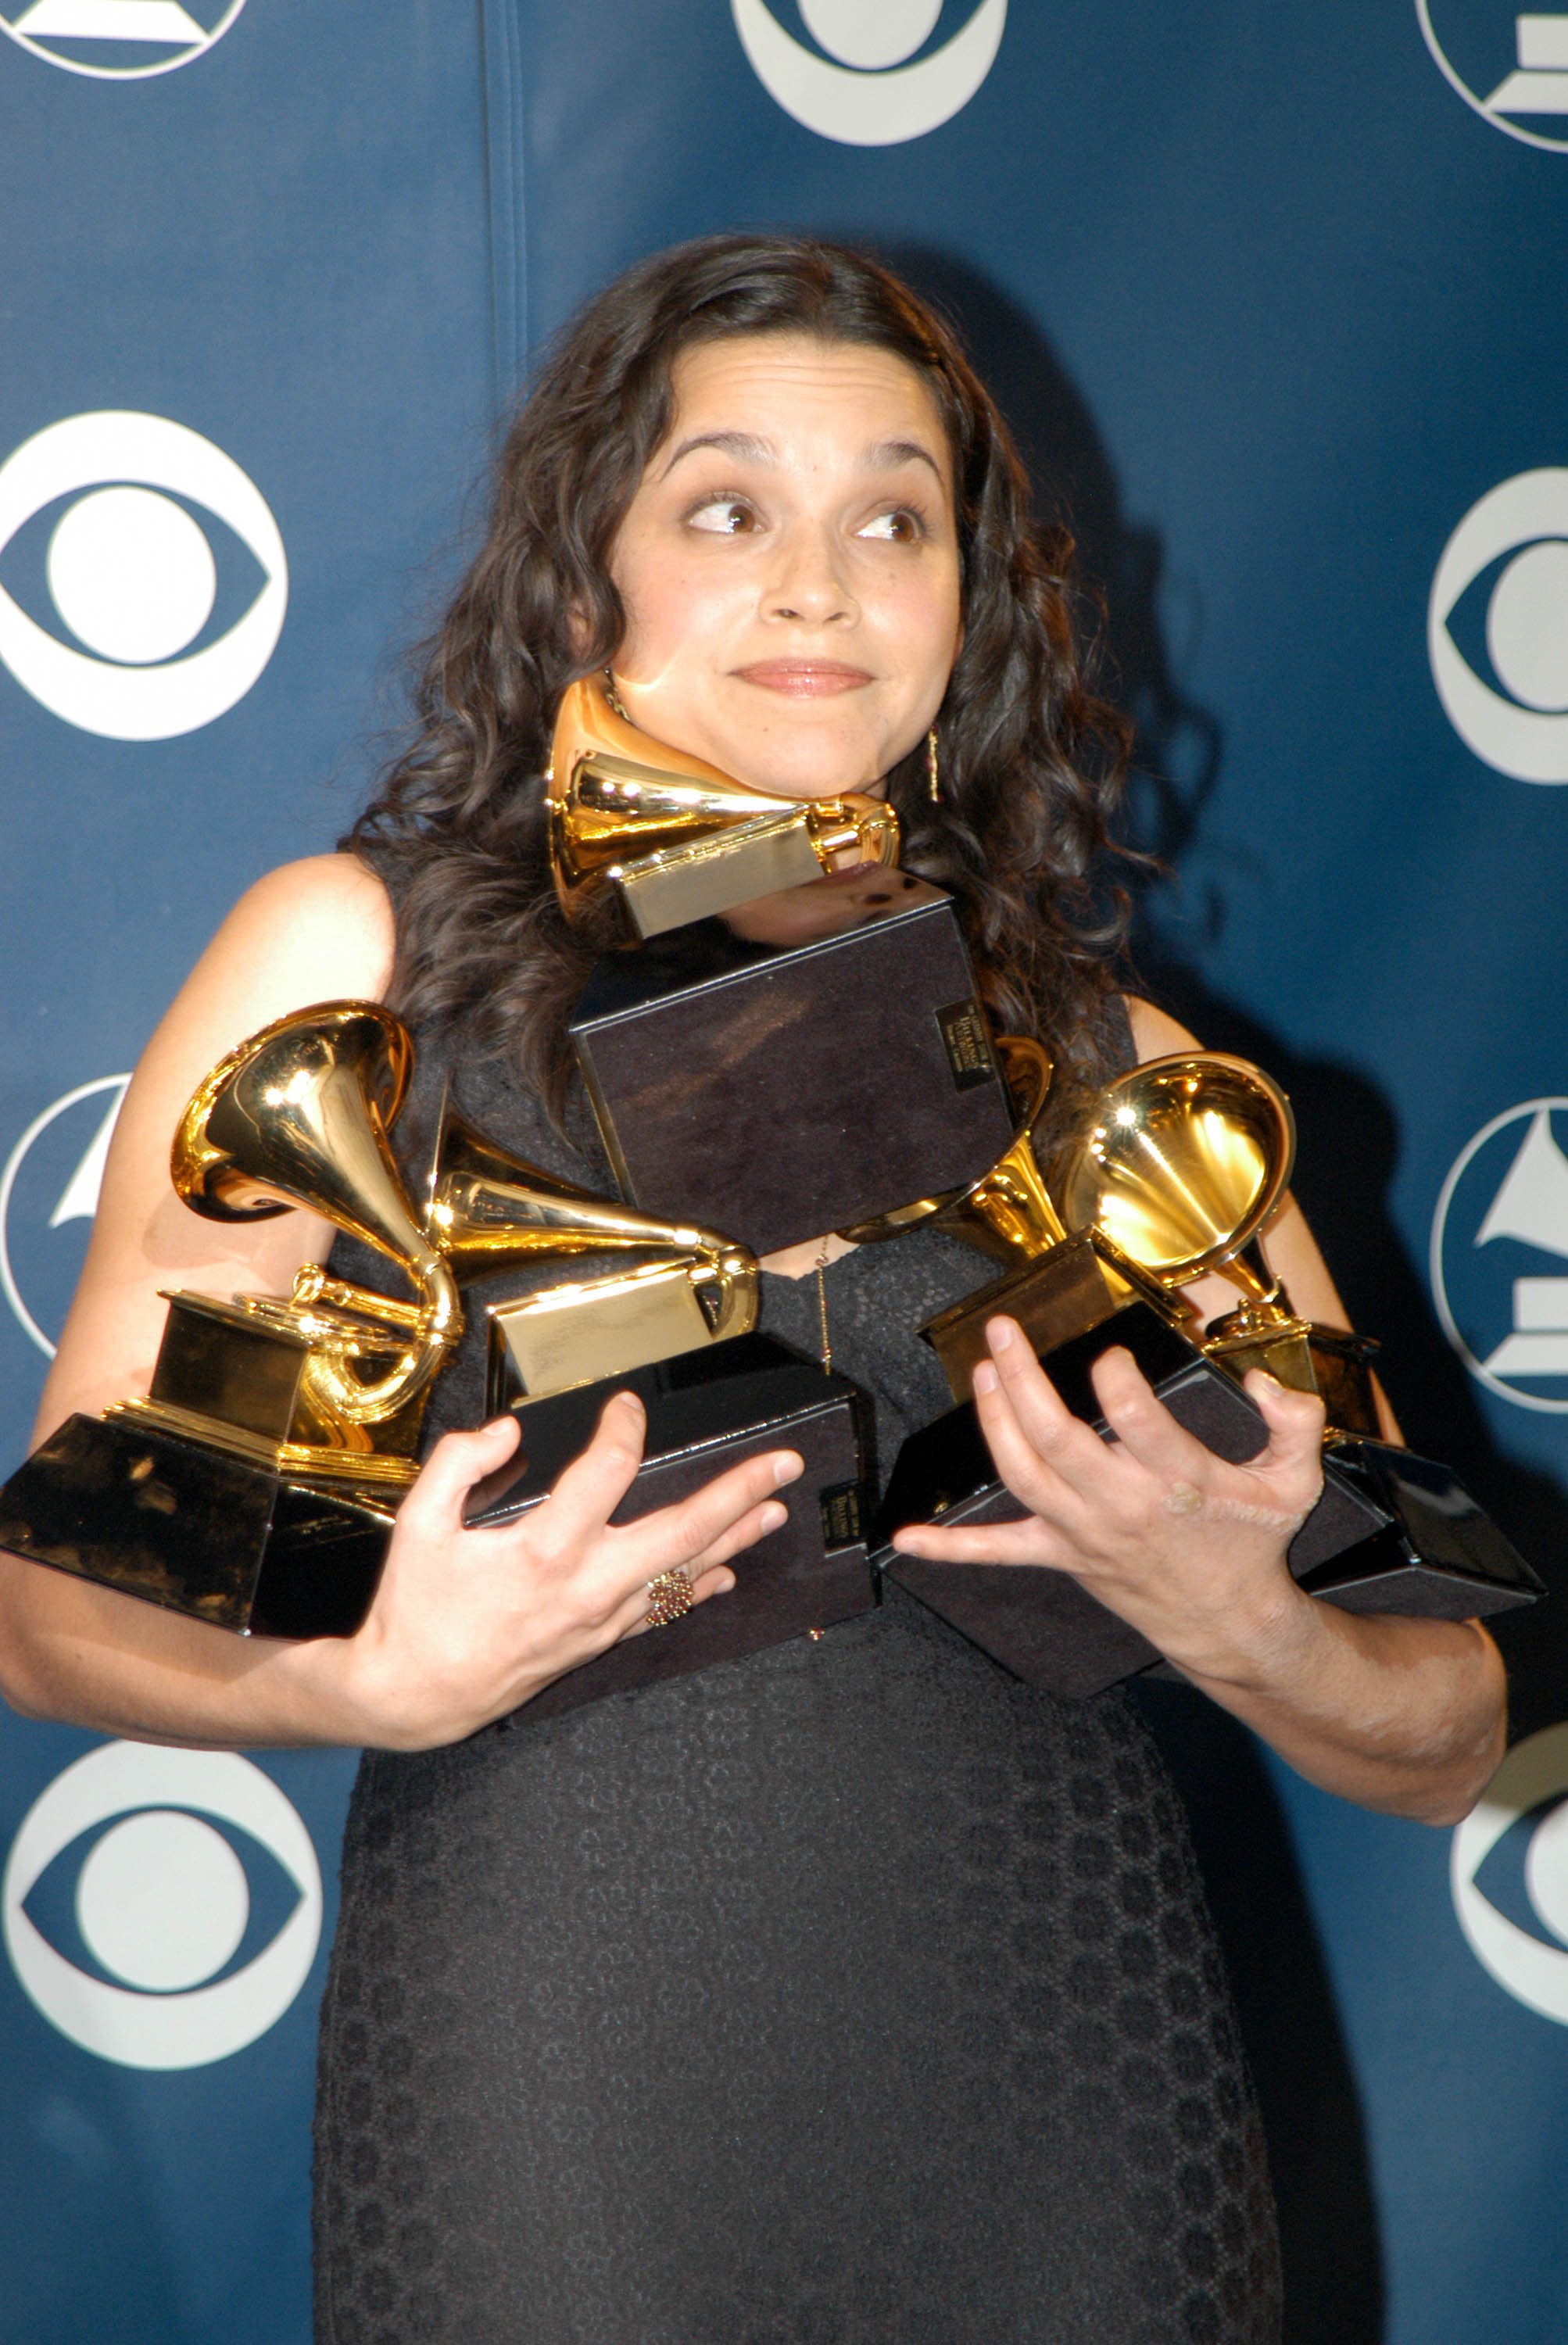 Norah Jones with her trophies at the 45th Annual Grammy Awards | Source: Getty Images